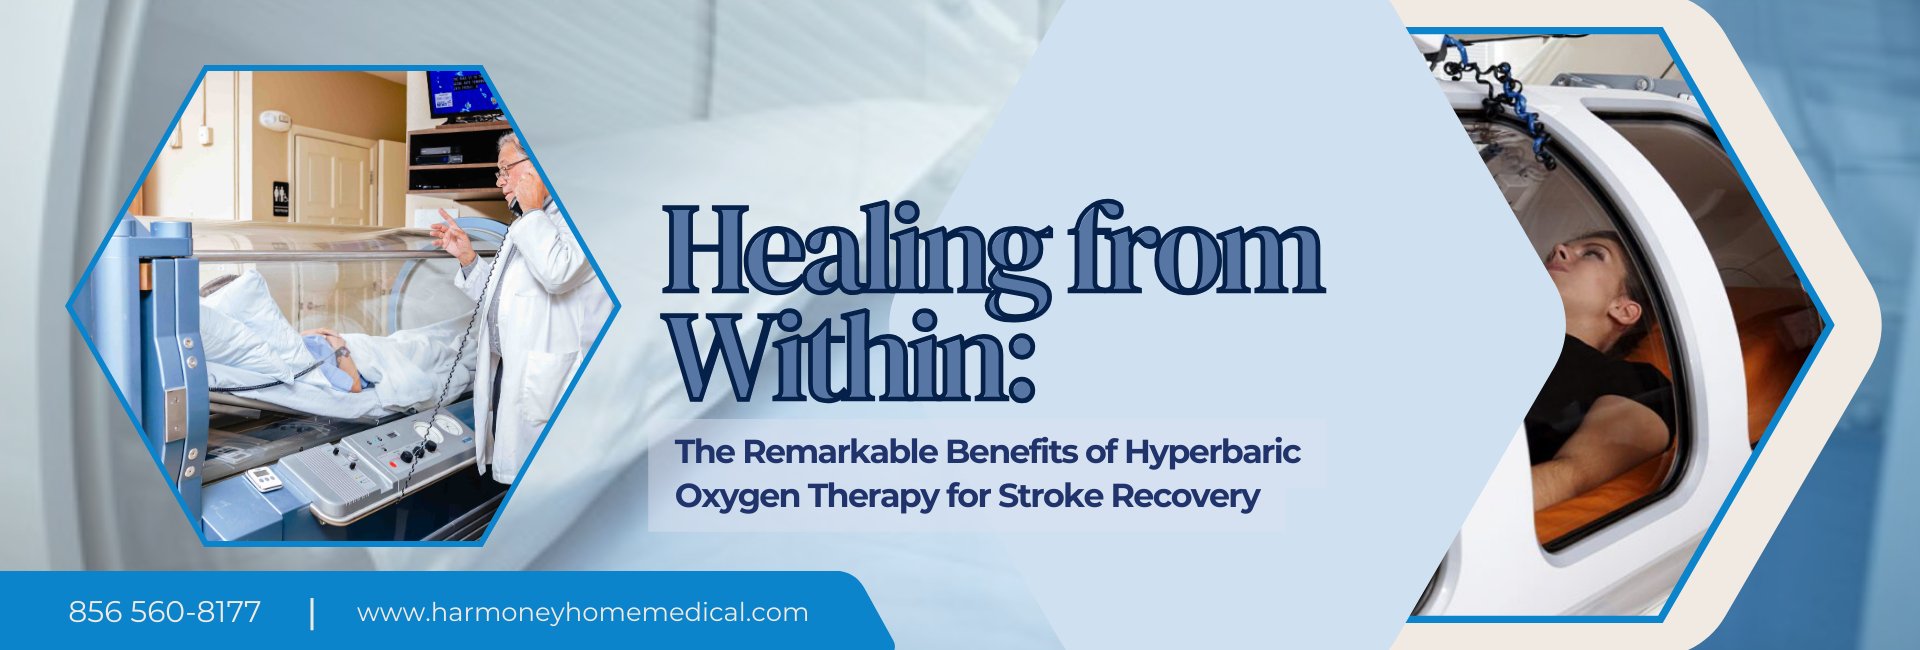 Healing from Within: The Remarkable Benefits of Hyperbaric Oxygen Therapy for Stroke Recovery